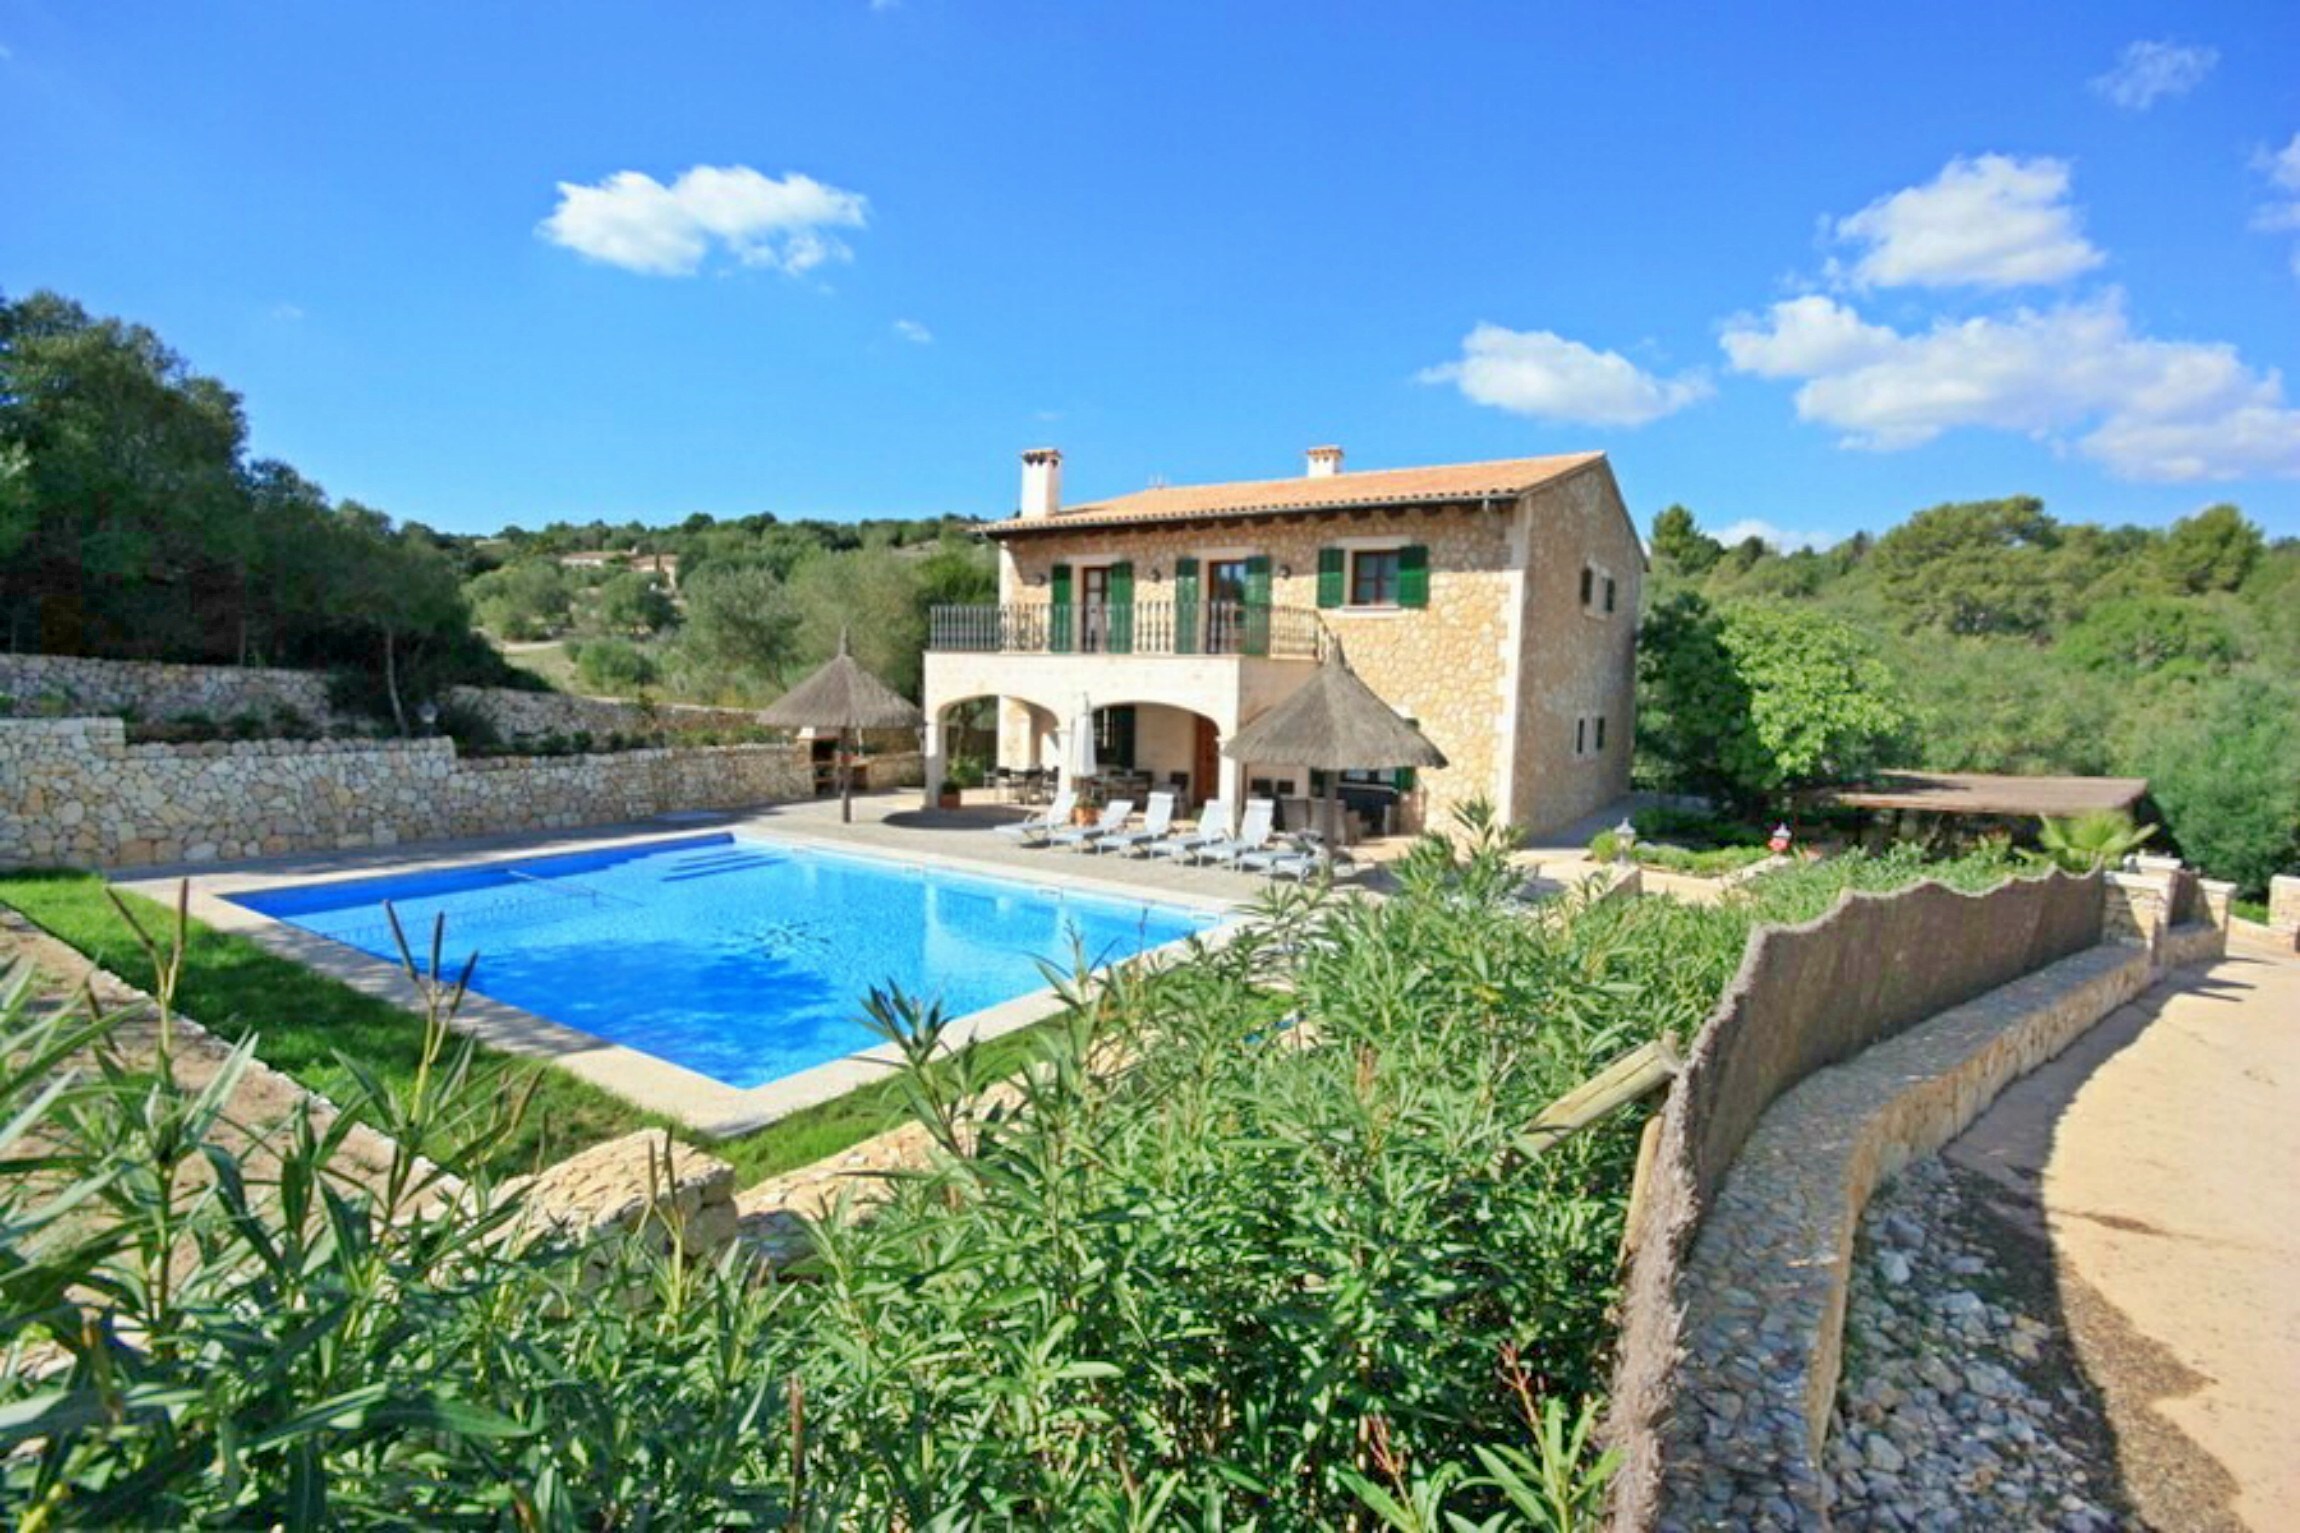 From 100 € per day you can rent your holiday home in Mallorca